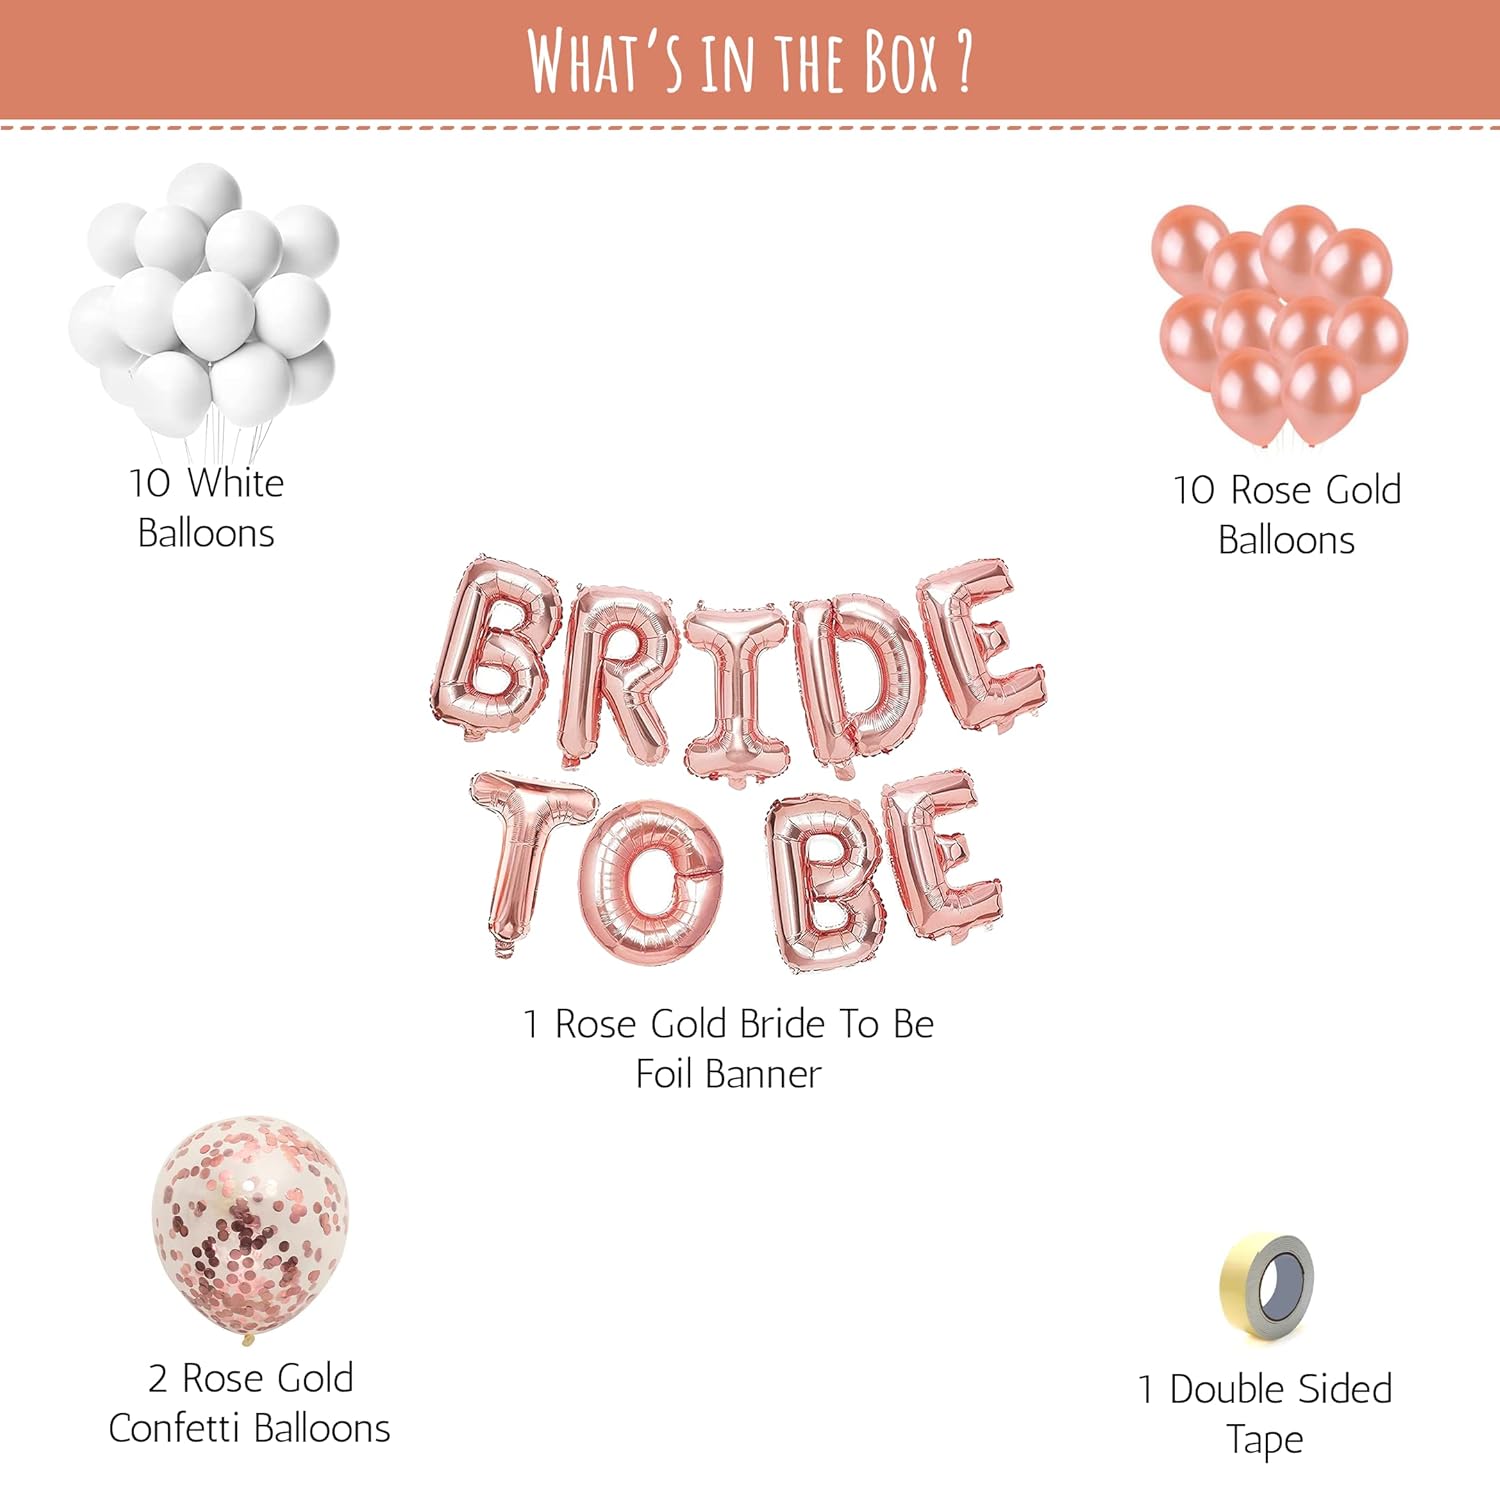 Make Your Bride Feel More Special